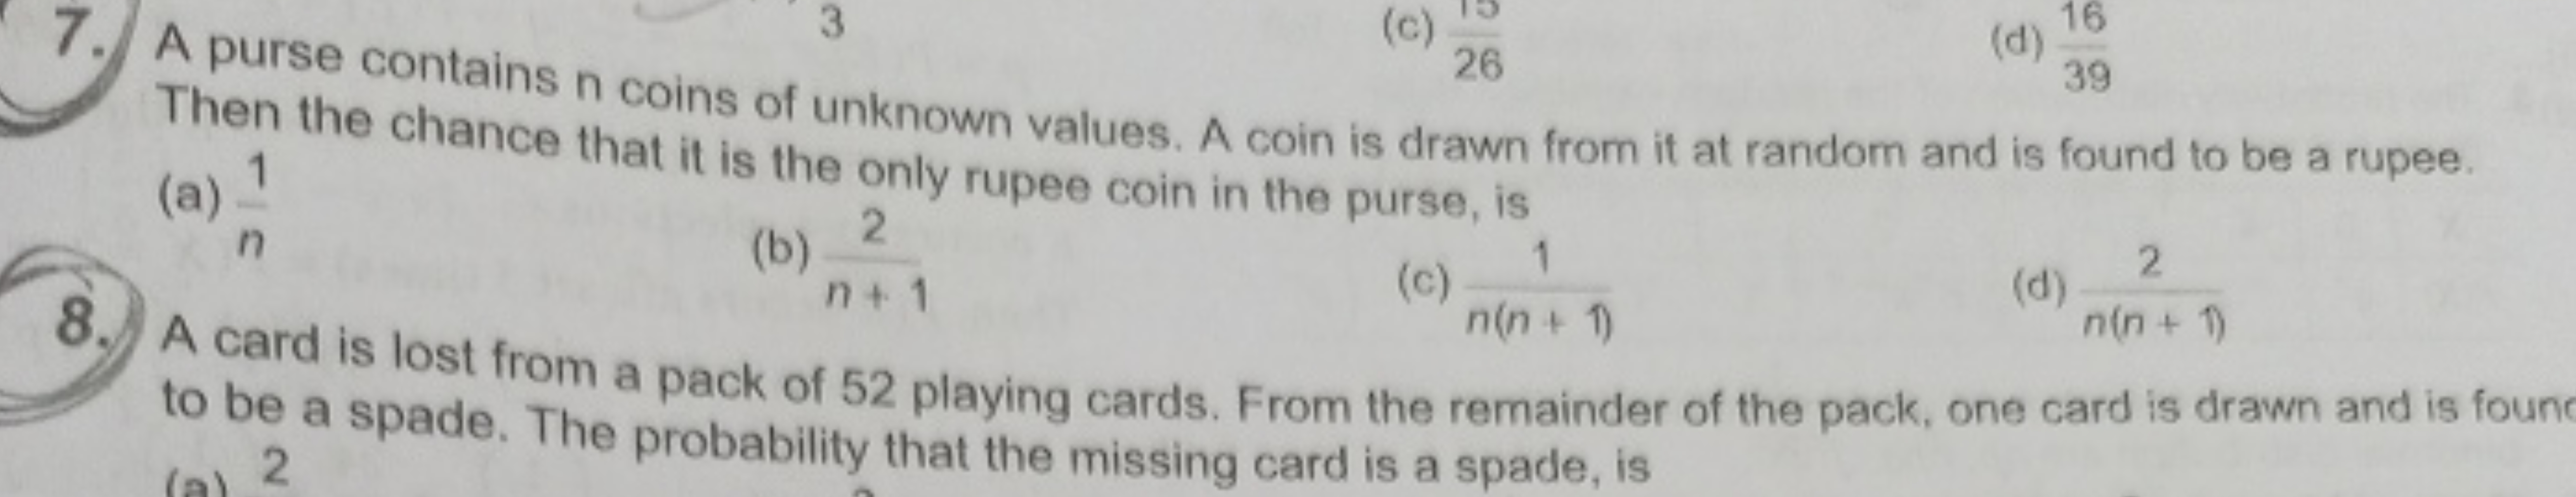 Then the chance that it is the only rupee coin in the purse, is